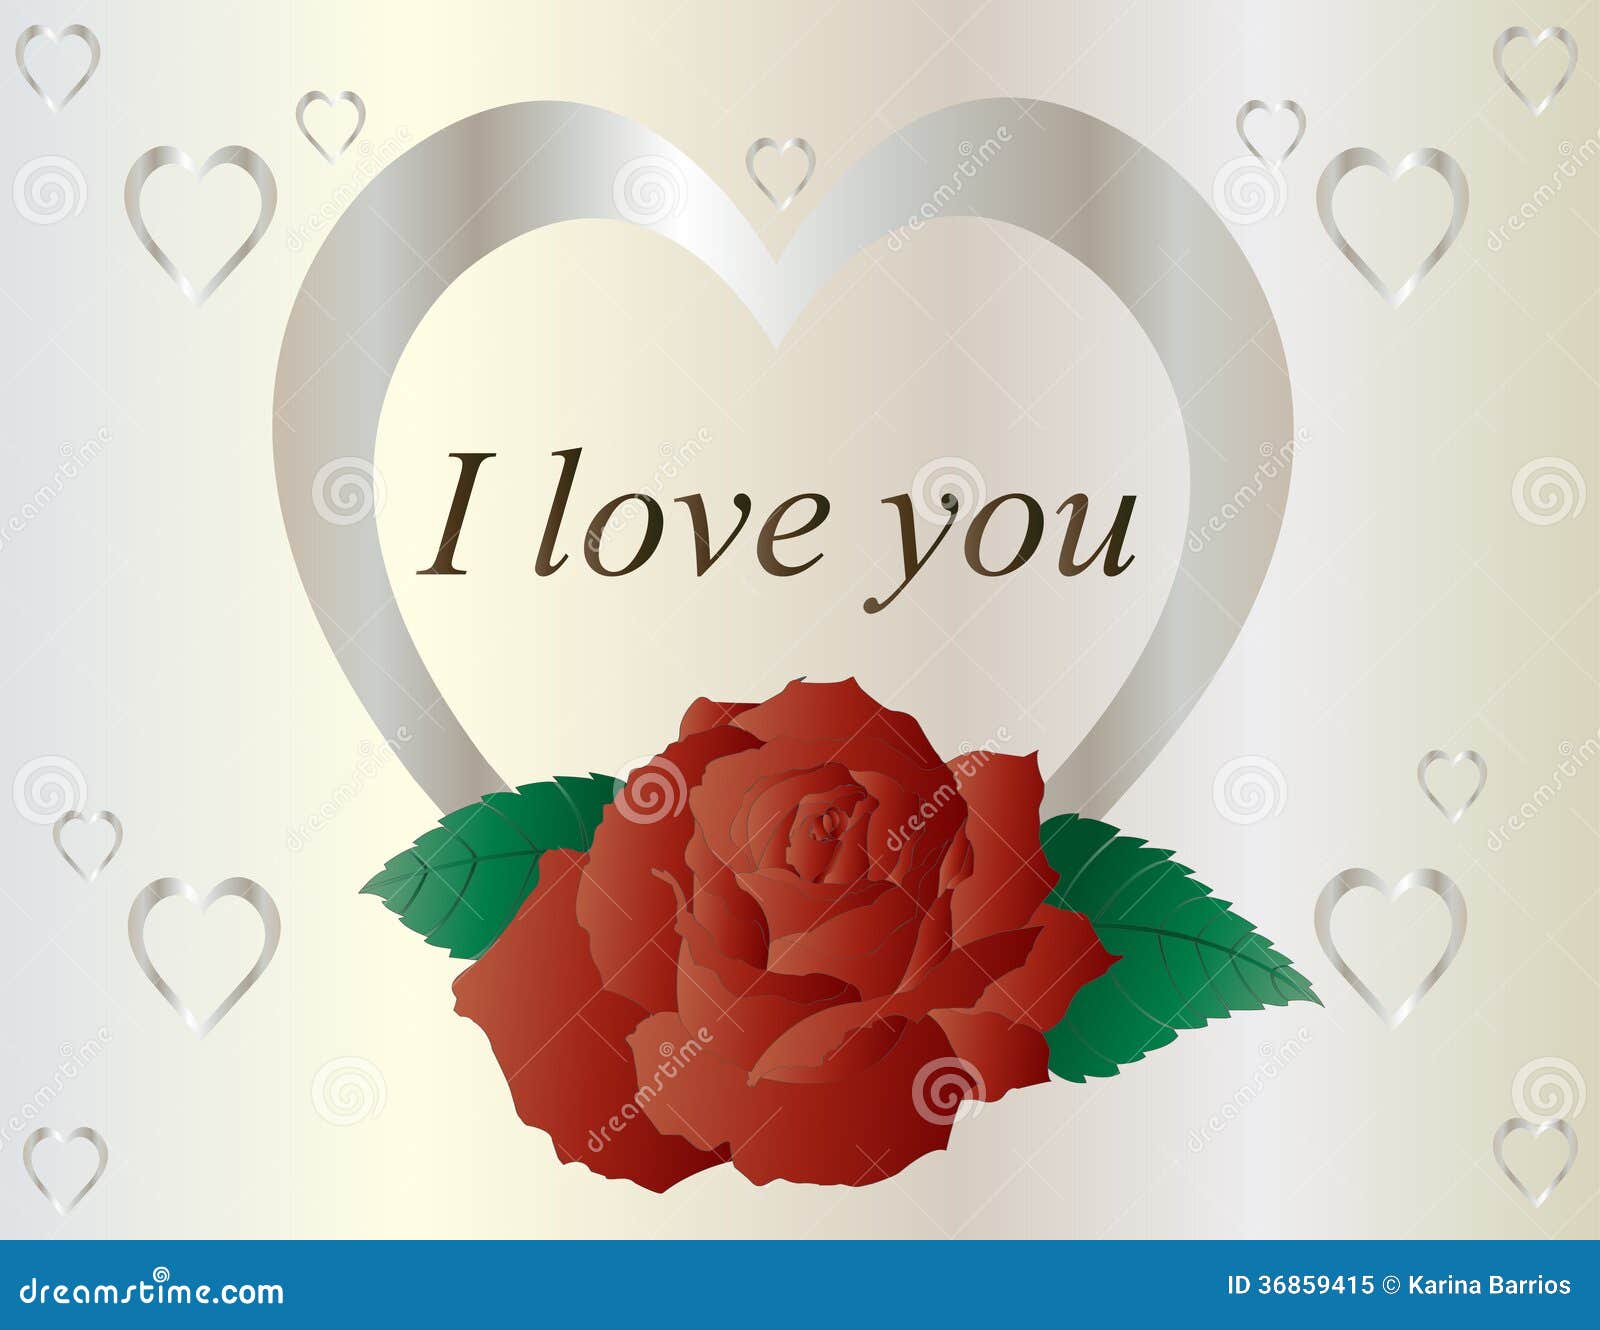 Silver heart with red rose stock vector. Illustration of valentine ...